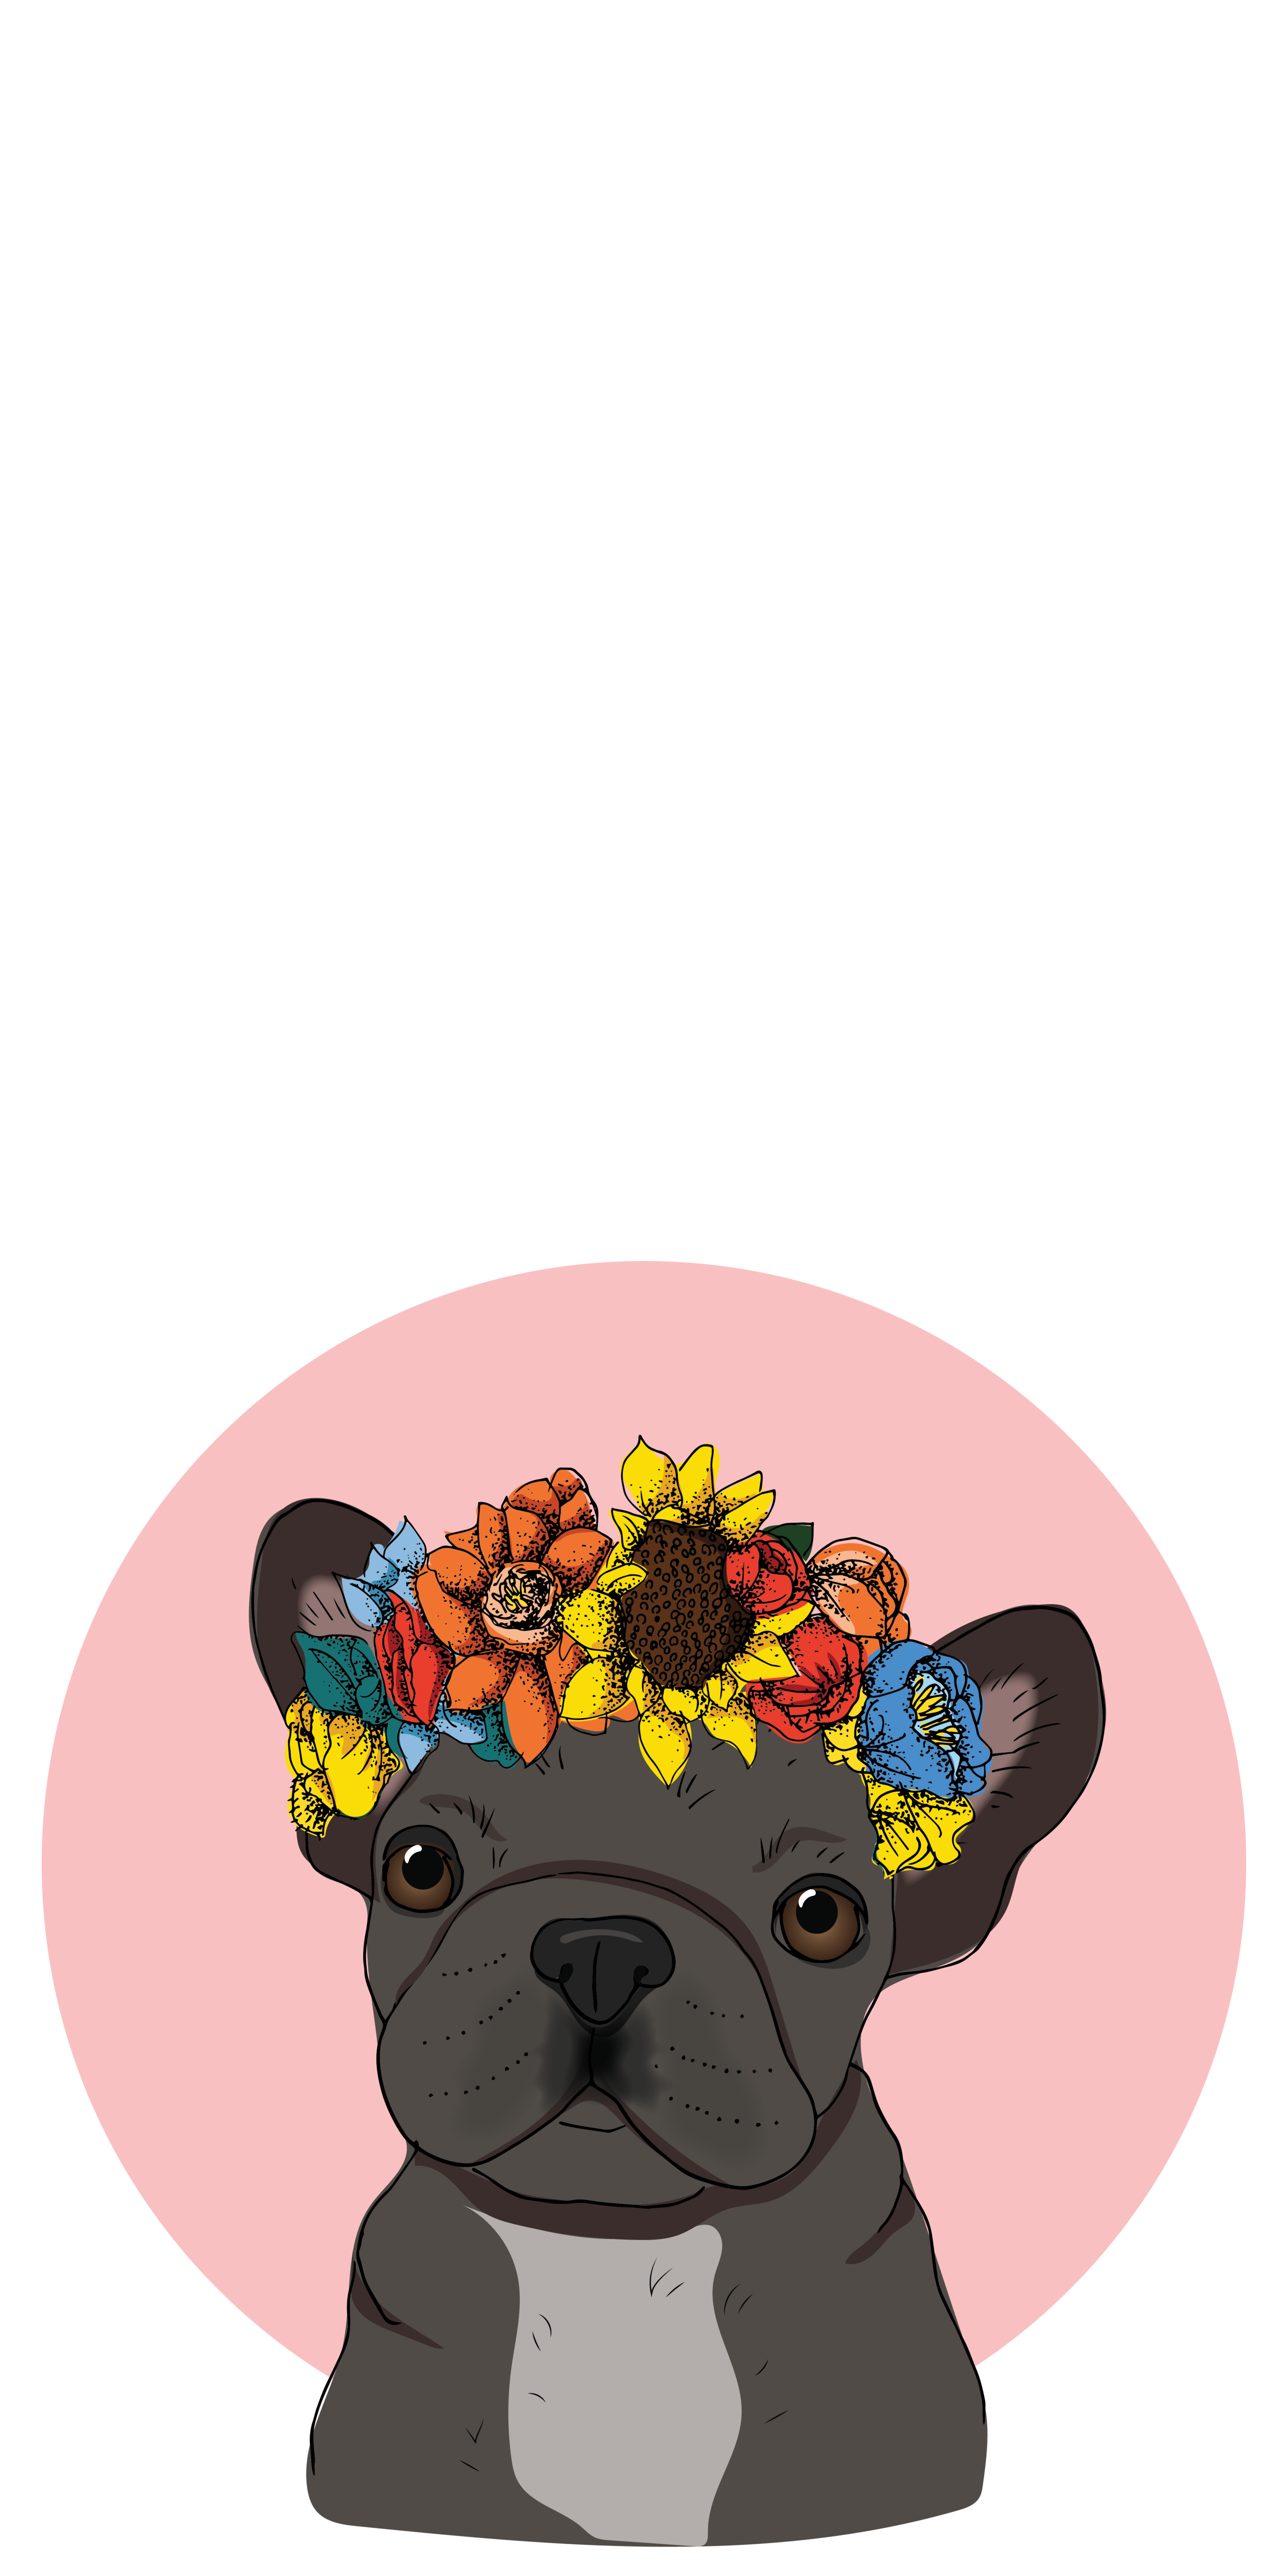 French #Bulldog with #Floral #Crown. #Casetify #iPhone #Art #Design #Cool # Wallpaper #Animals. Dog wallpaper iphone, Bulldog wallpaper, French bulldog wallpaper